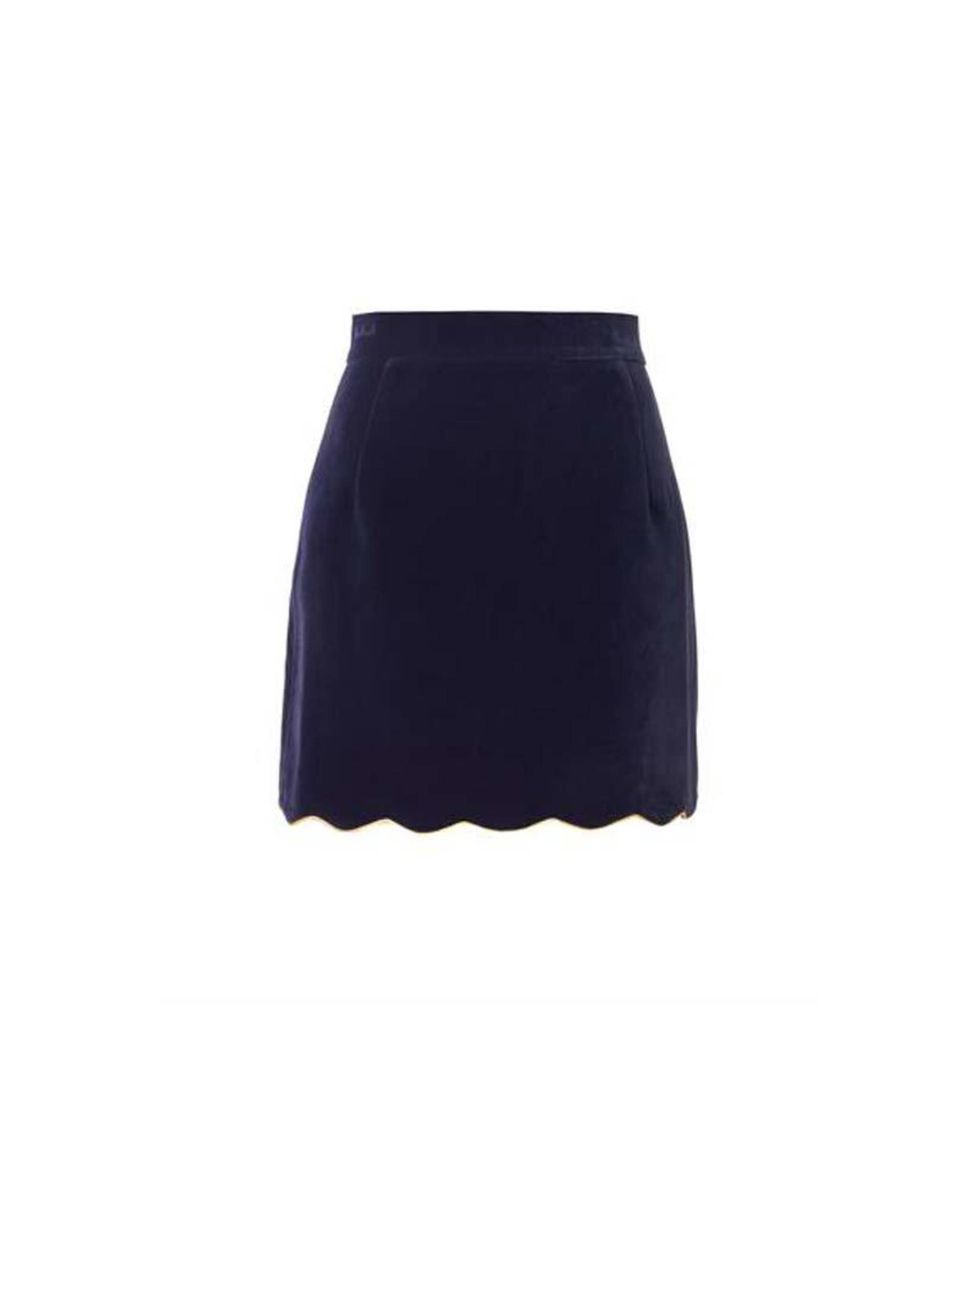 <p>Embrace the 60's trend with a mini skirt</p>

<p>House of Holland, £150 available at <a href="http://www.matchesfashion.com/product/199593">Matches </a></p>